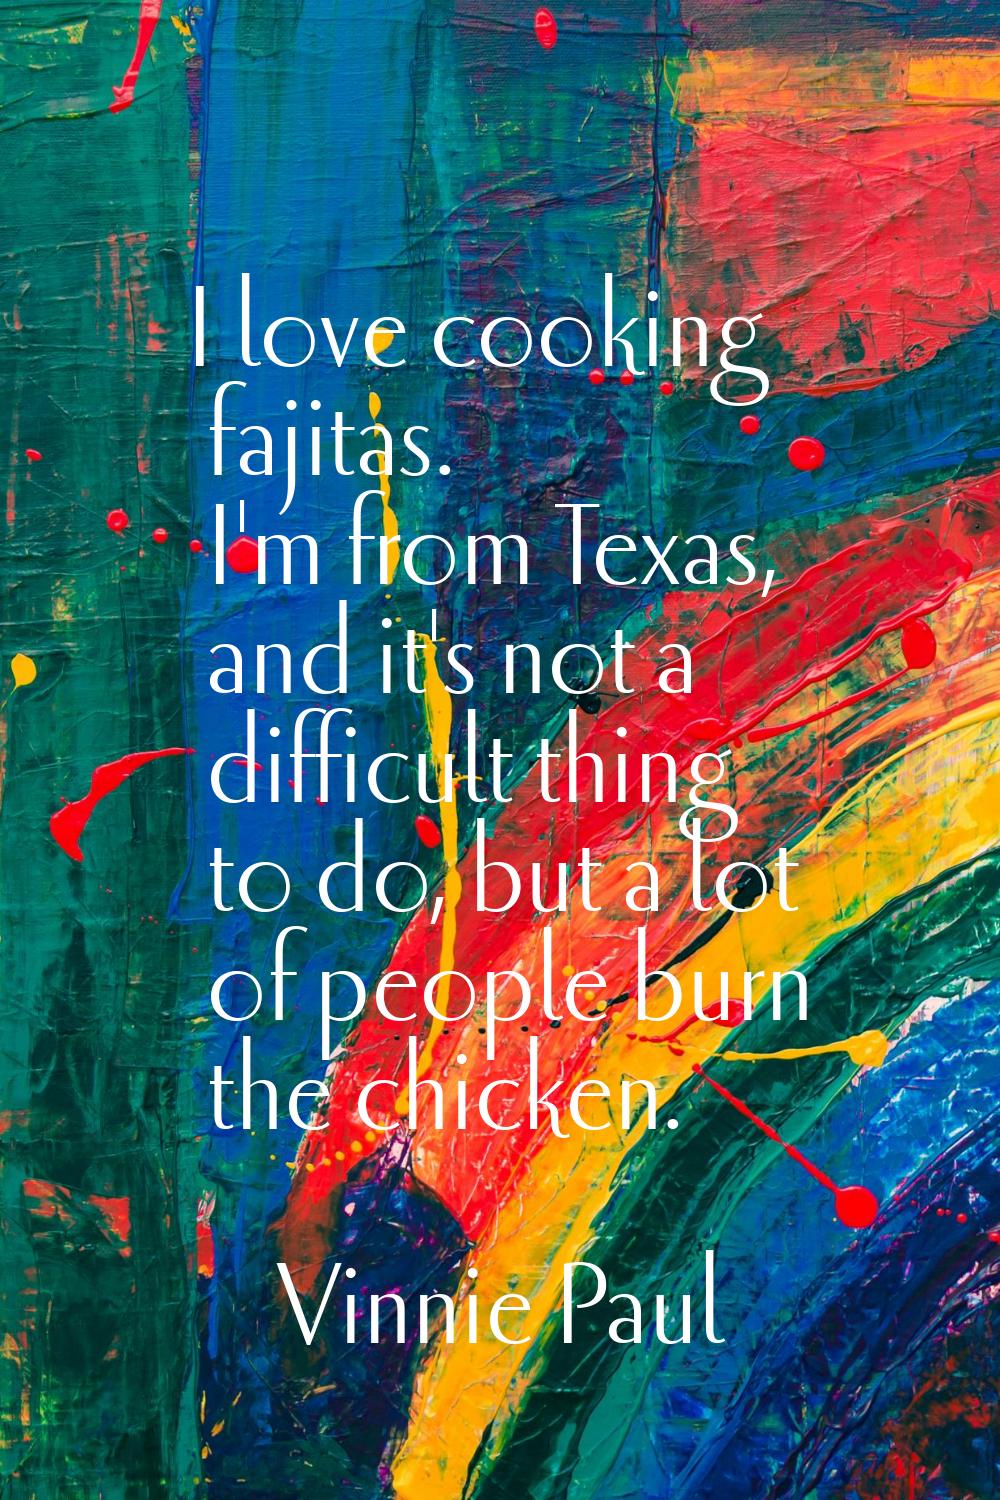 I love cooking fajitas. I'm from Texas, and it's not a difficult thing to do, but a lot of people b